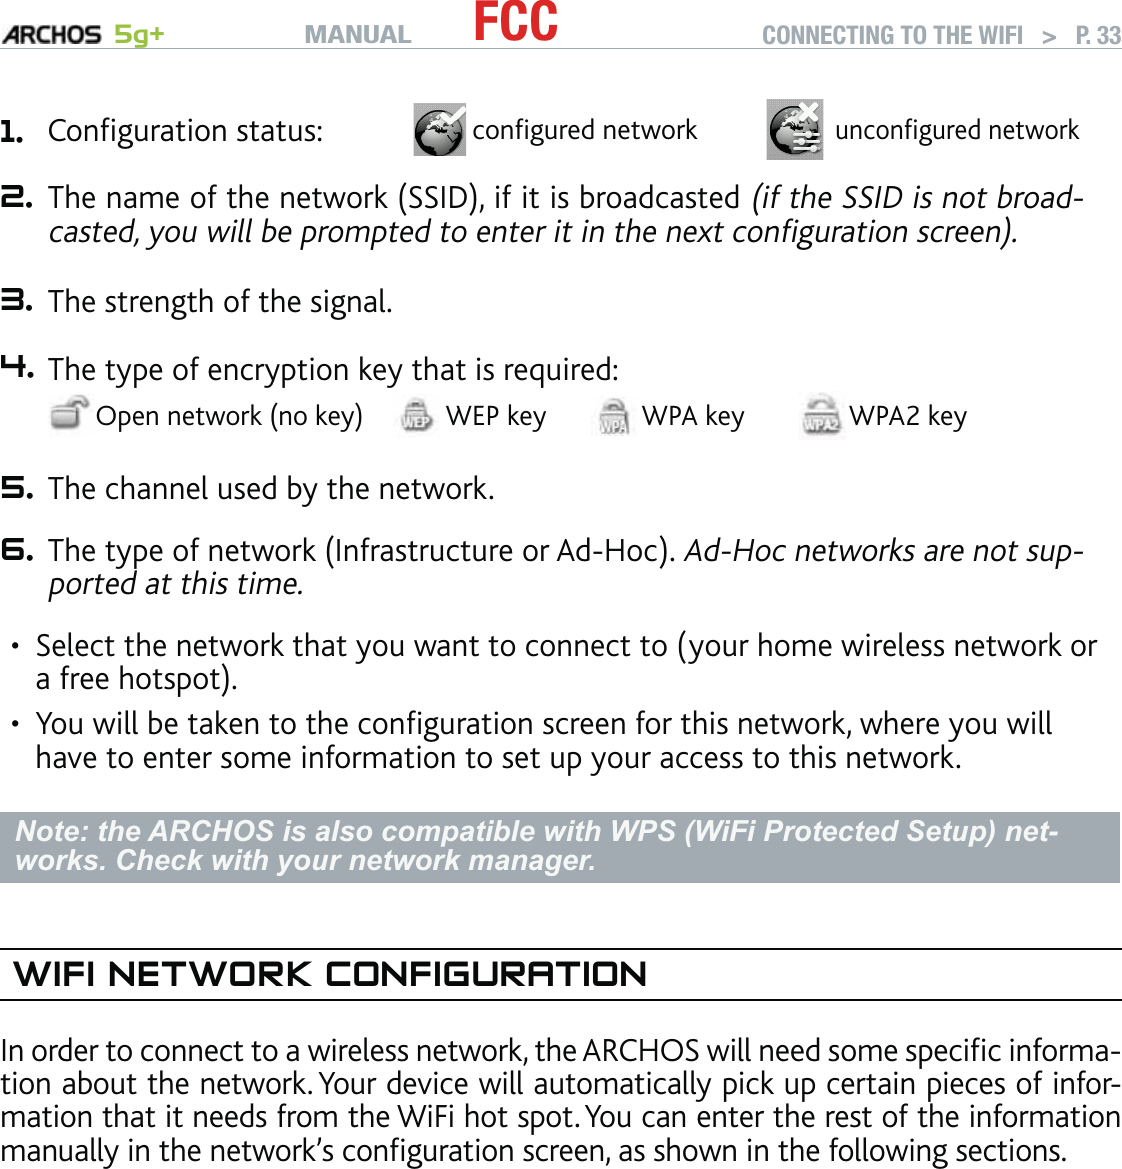 MANUAL 5g+ FCC CONNECTING TO THE WIFI   &gt;   P. 331. Conﬁguration status: conﬁgured networkunconﬁgured network2. The name of the network (SSID), if it is broadcasted (if the SSID is not broad-casted, you will be prompted to enter it in the next conﬁguration screen).3. The strength of the signal.4. The type of encryption key that is required:Open network (no key) WEP key WPA key WPA2 key5. The channel used by the network.6. The type of network (Infrastructure or Ad-Hoc). Ad-Hoc networks are not sup-ported at this time.Select the network that you want to connect to (your home wireless network or a free hotspot).You will be taken to the conﬁguration screen for this network, where you will have to enter some information to set up your access to this network.Note: the ARCHOS is also compatible with WPS (WiFi Protected Setup) net-works. Check with your network manager. WIFI NETWORK CONFIGURATIONIn order to connect to a wireless network, the ARCHOS will need some speciﬁc informa-tion about the network. Your device will automatically pick up certain pieces of infor-mation that it needs from the WiFi hot spot. You can enter the rest of the information manually in the network’s conﬁguration screen, as shown in the following sections.Note that your device will remember the network connection information that you enter, in order to re-use it and connect automatically to the network when it is in range.••